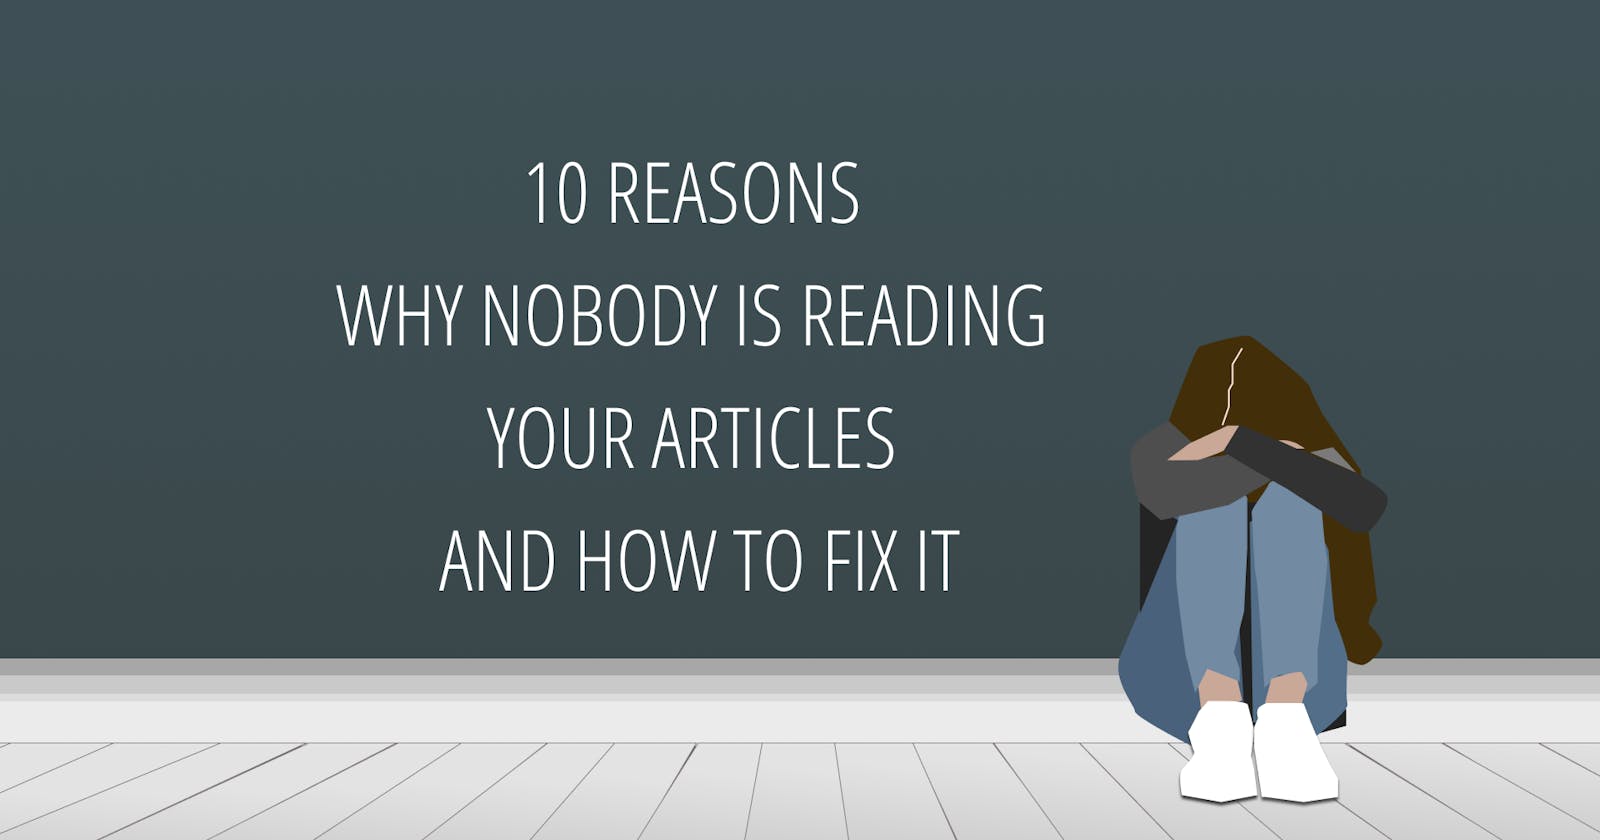 10 reasons why nobody is reading your articles and how to fix it